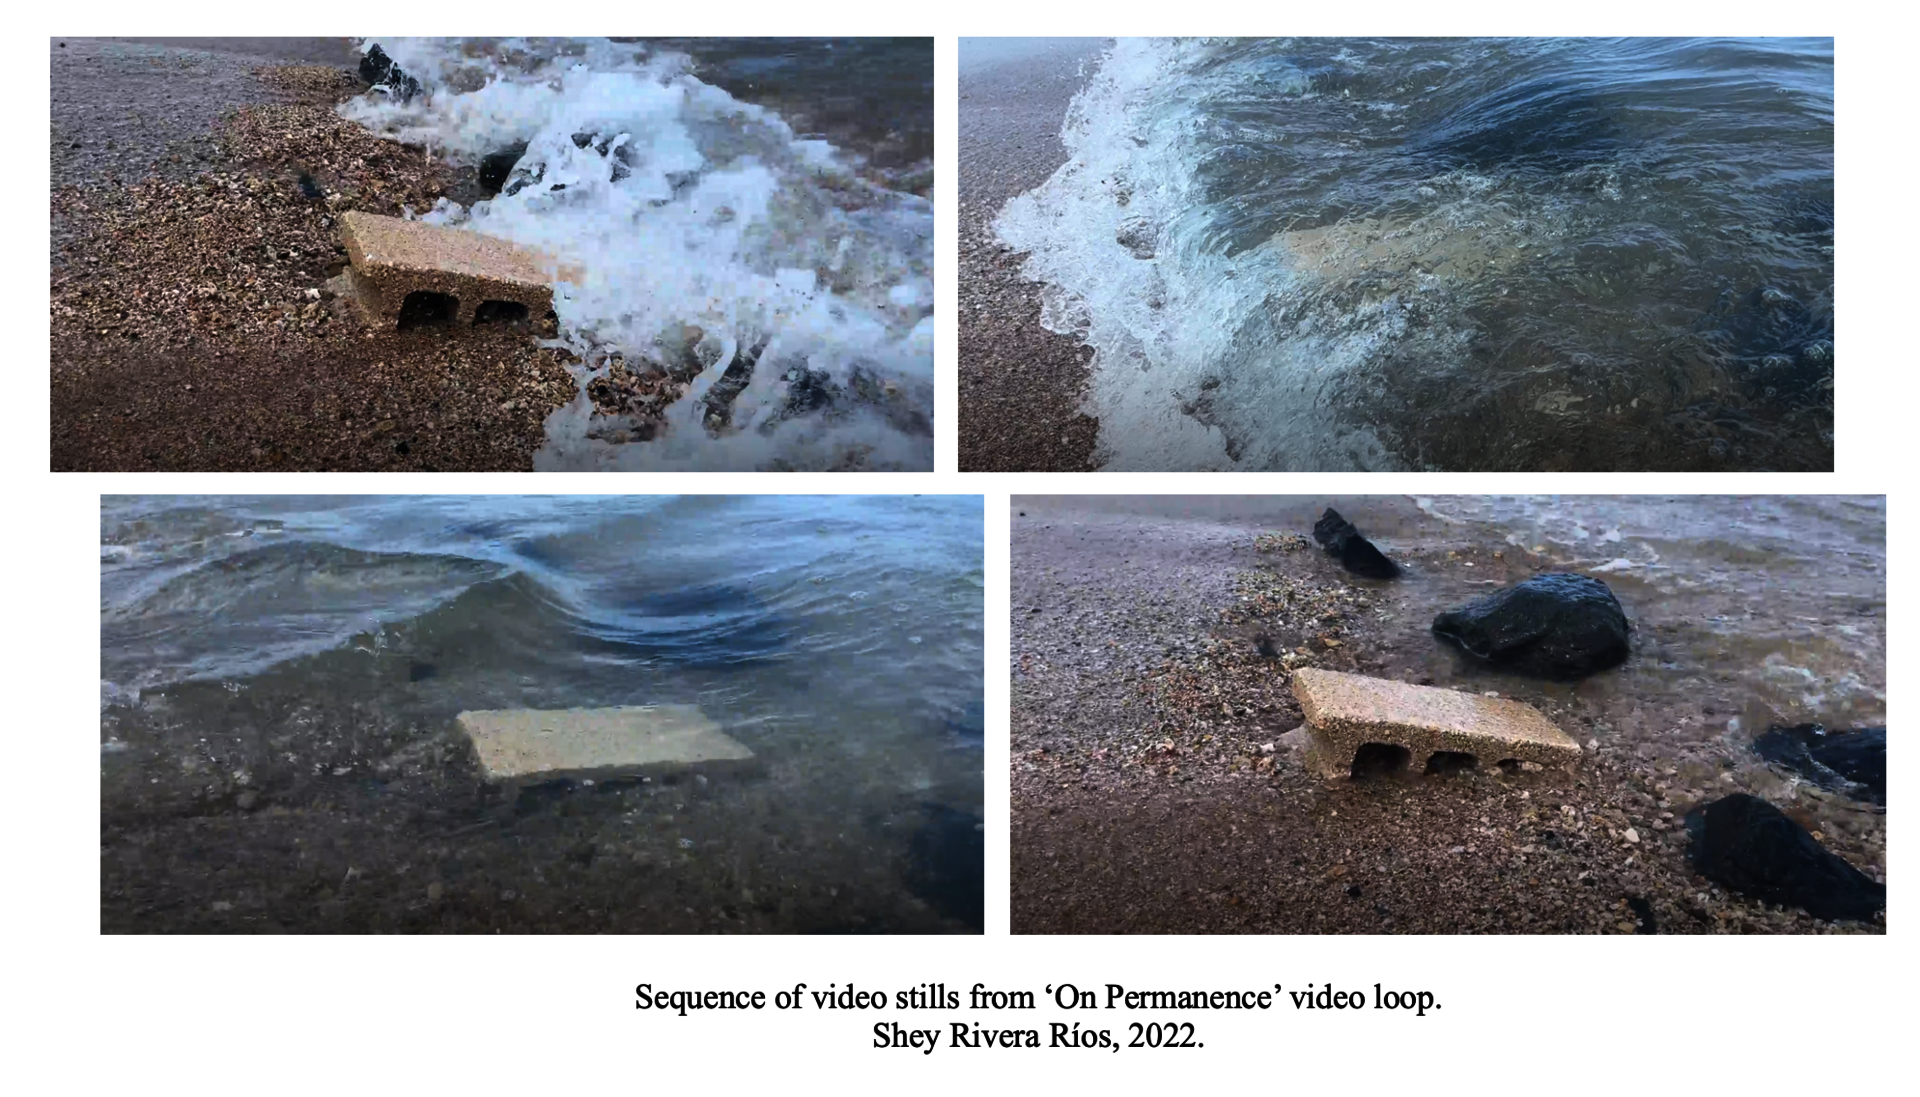 cinder block at edge of water video still. see caption in image.